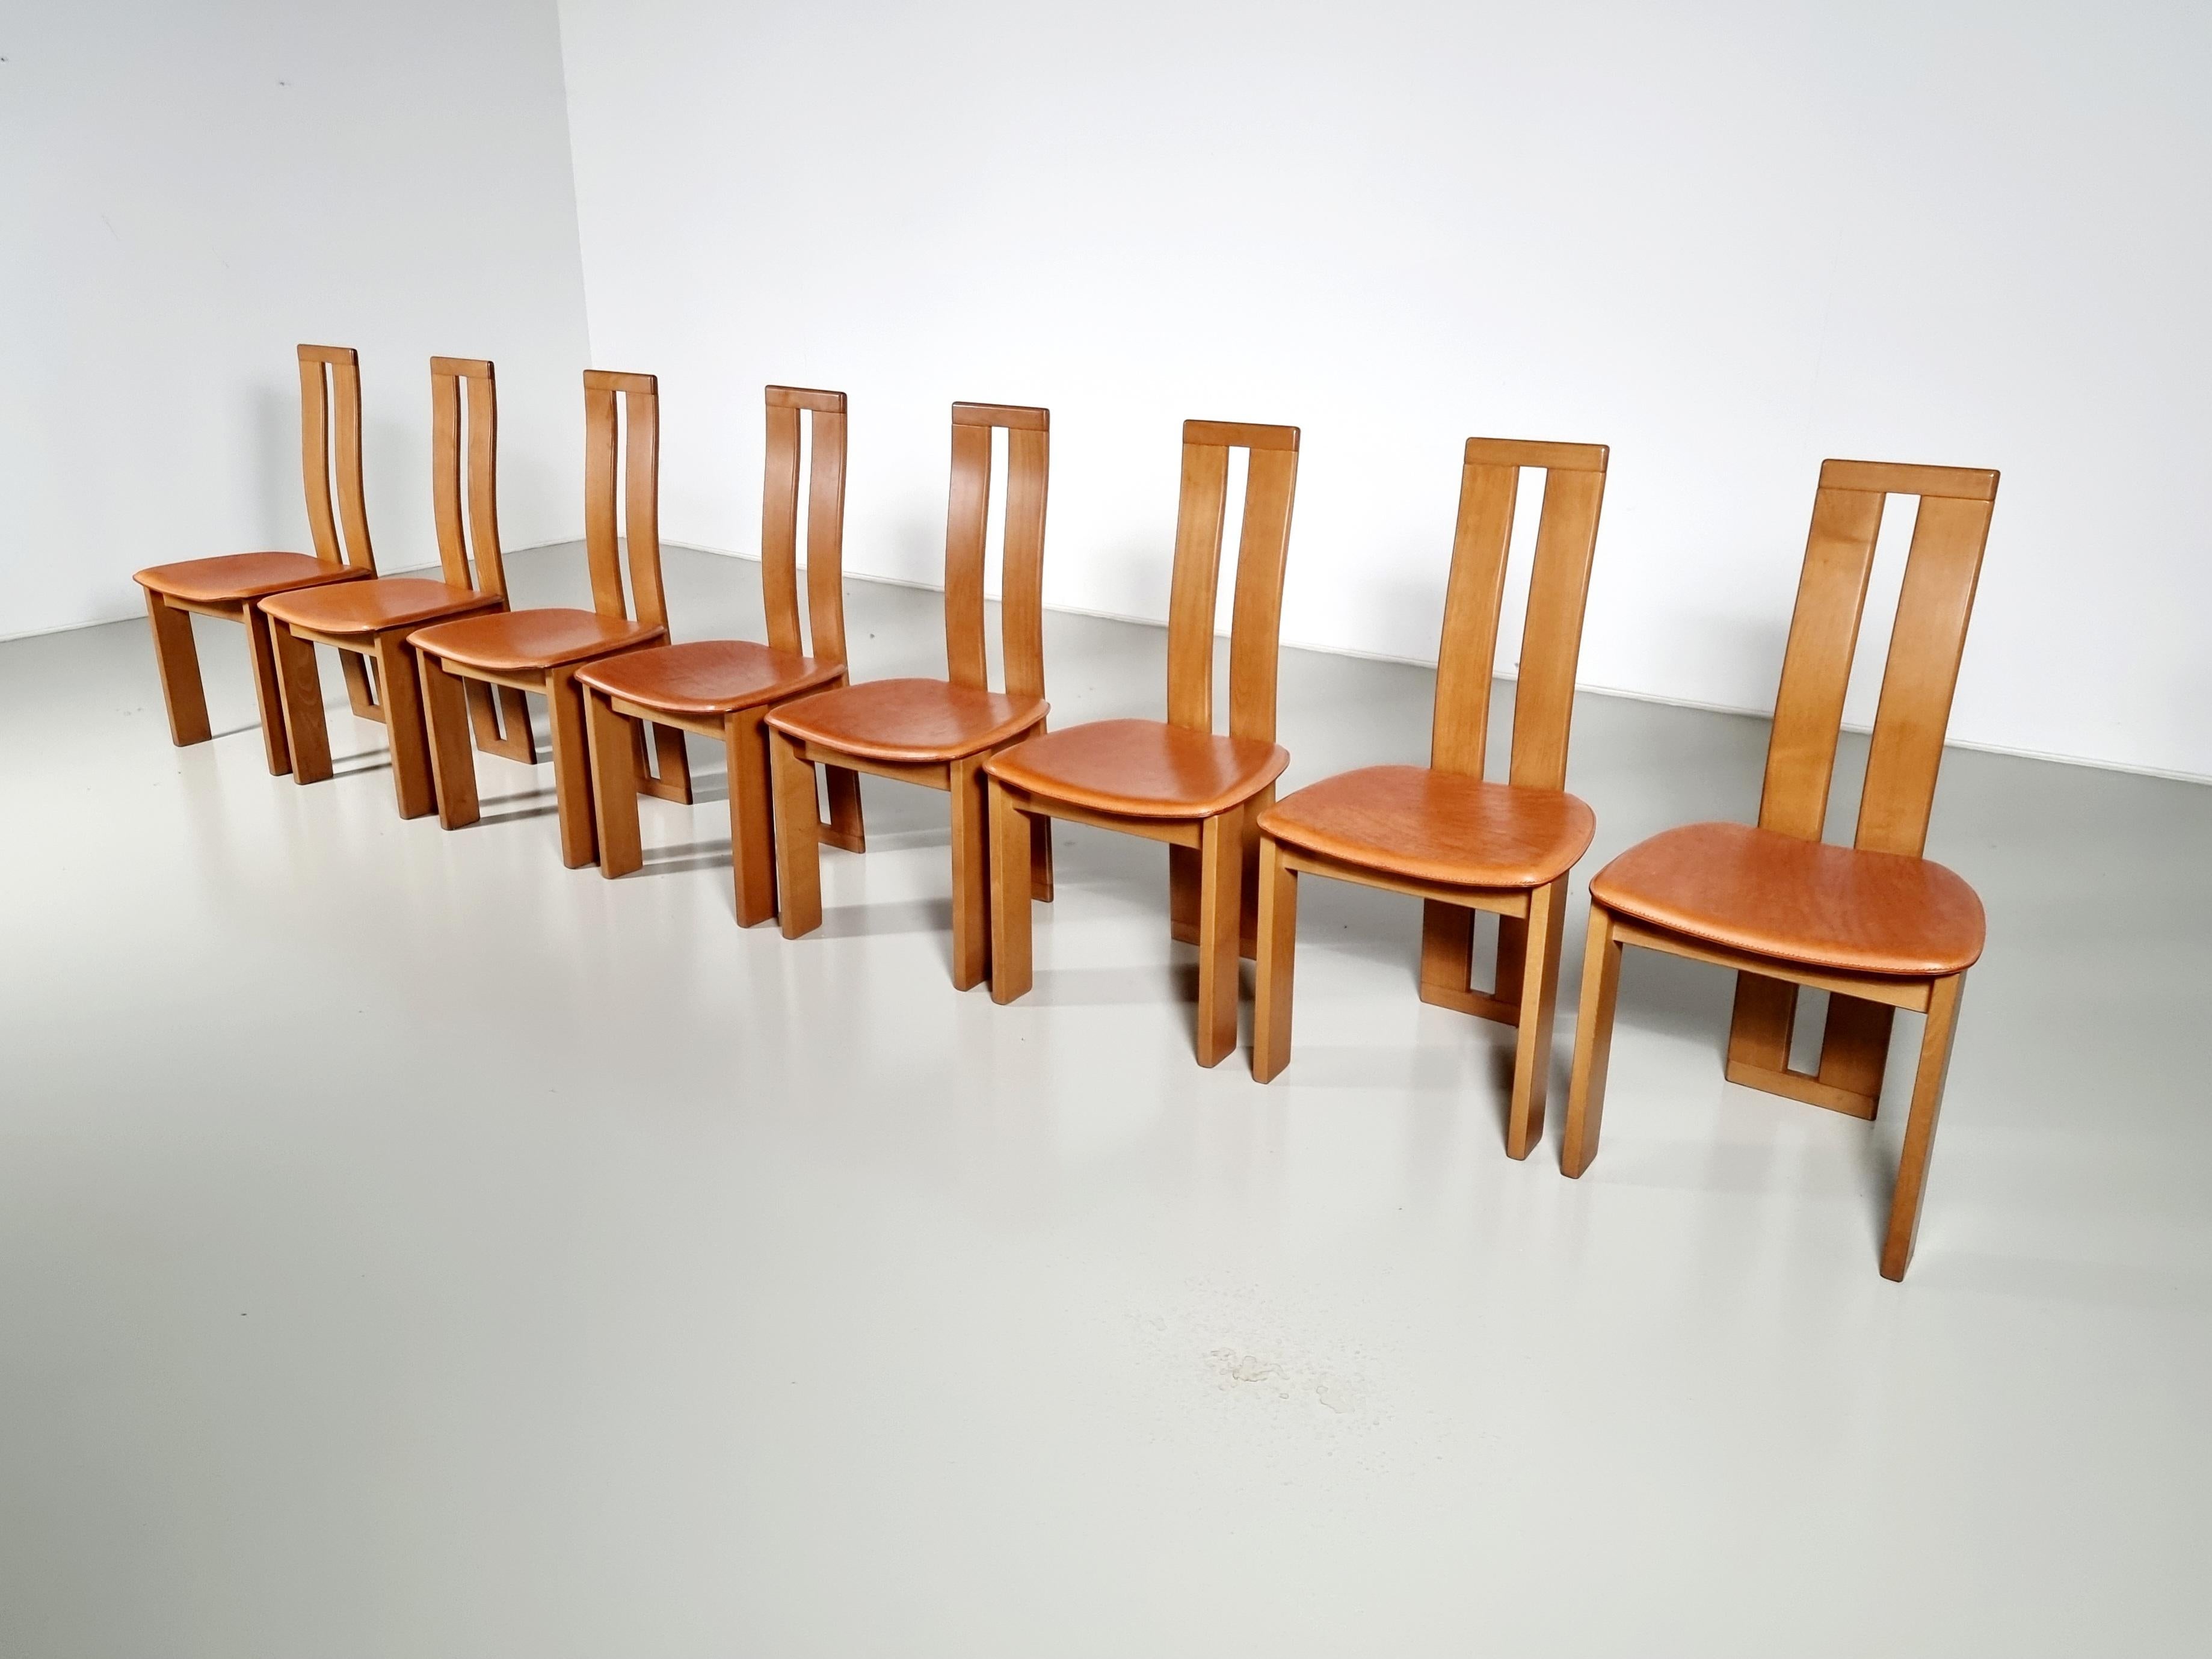 A set of 8 sculpted beech wood dining chairs by Mario Marenco for Mobil Girgi 1970s.

The chairs are designed in the typical fashion of Mario Marenco, with 2 big horizontal wood beams, a curved backrest stretching from below to the top, the